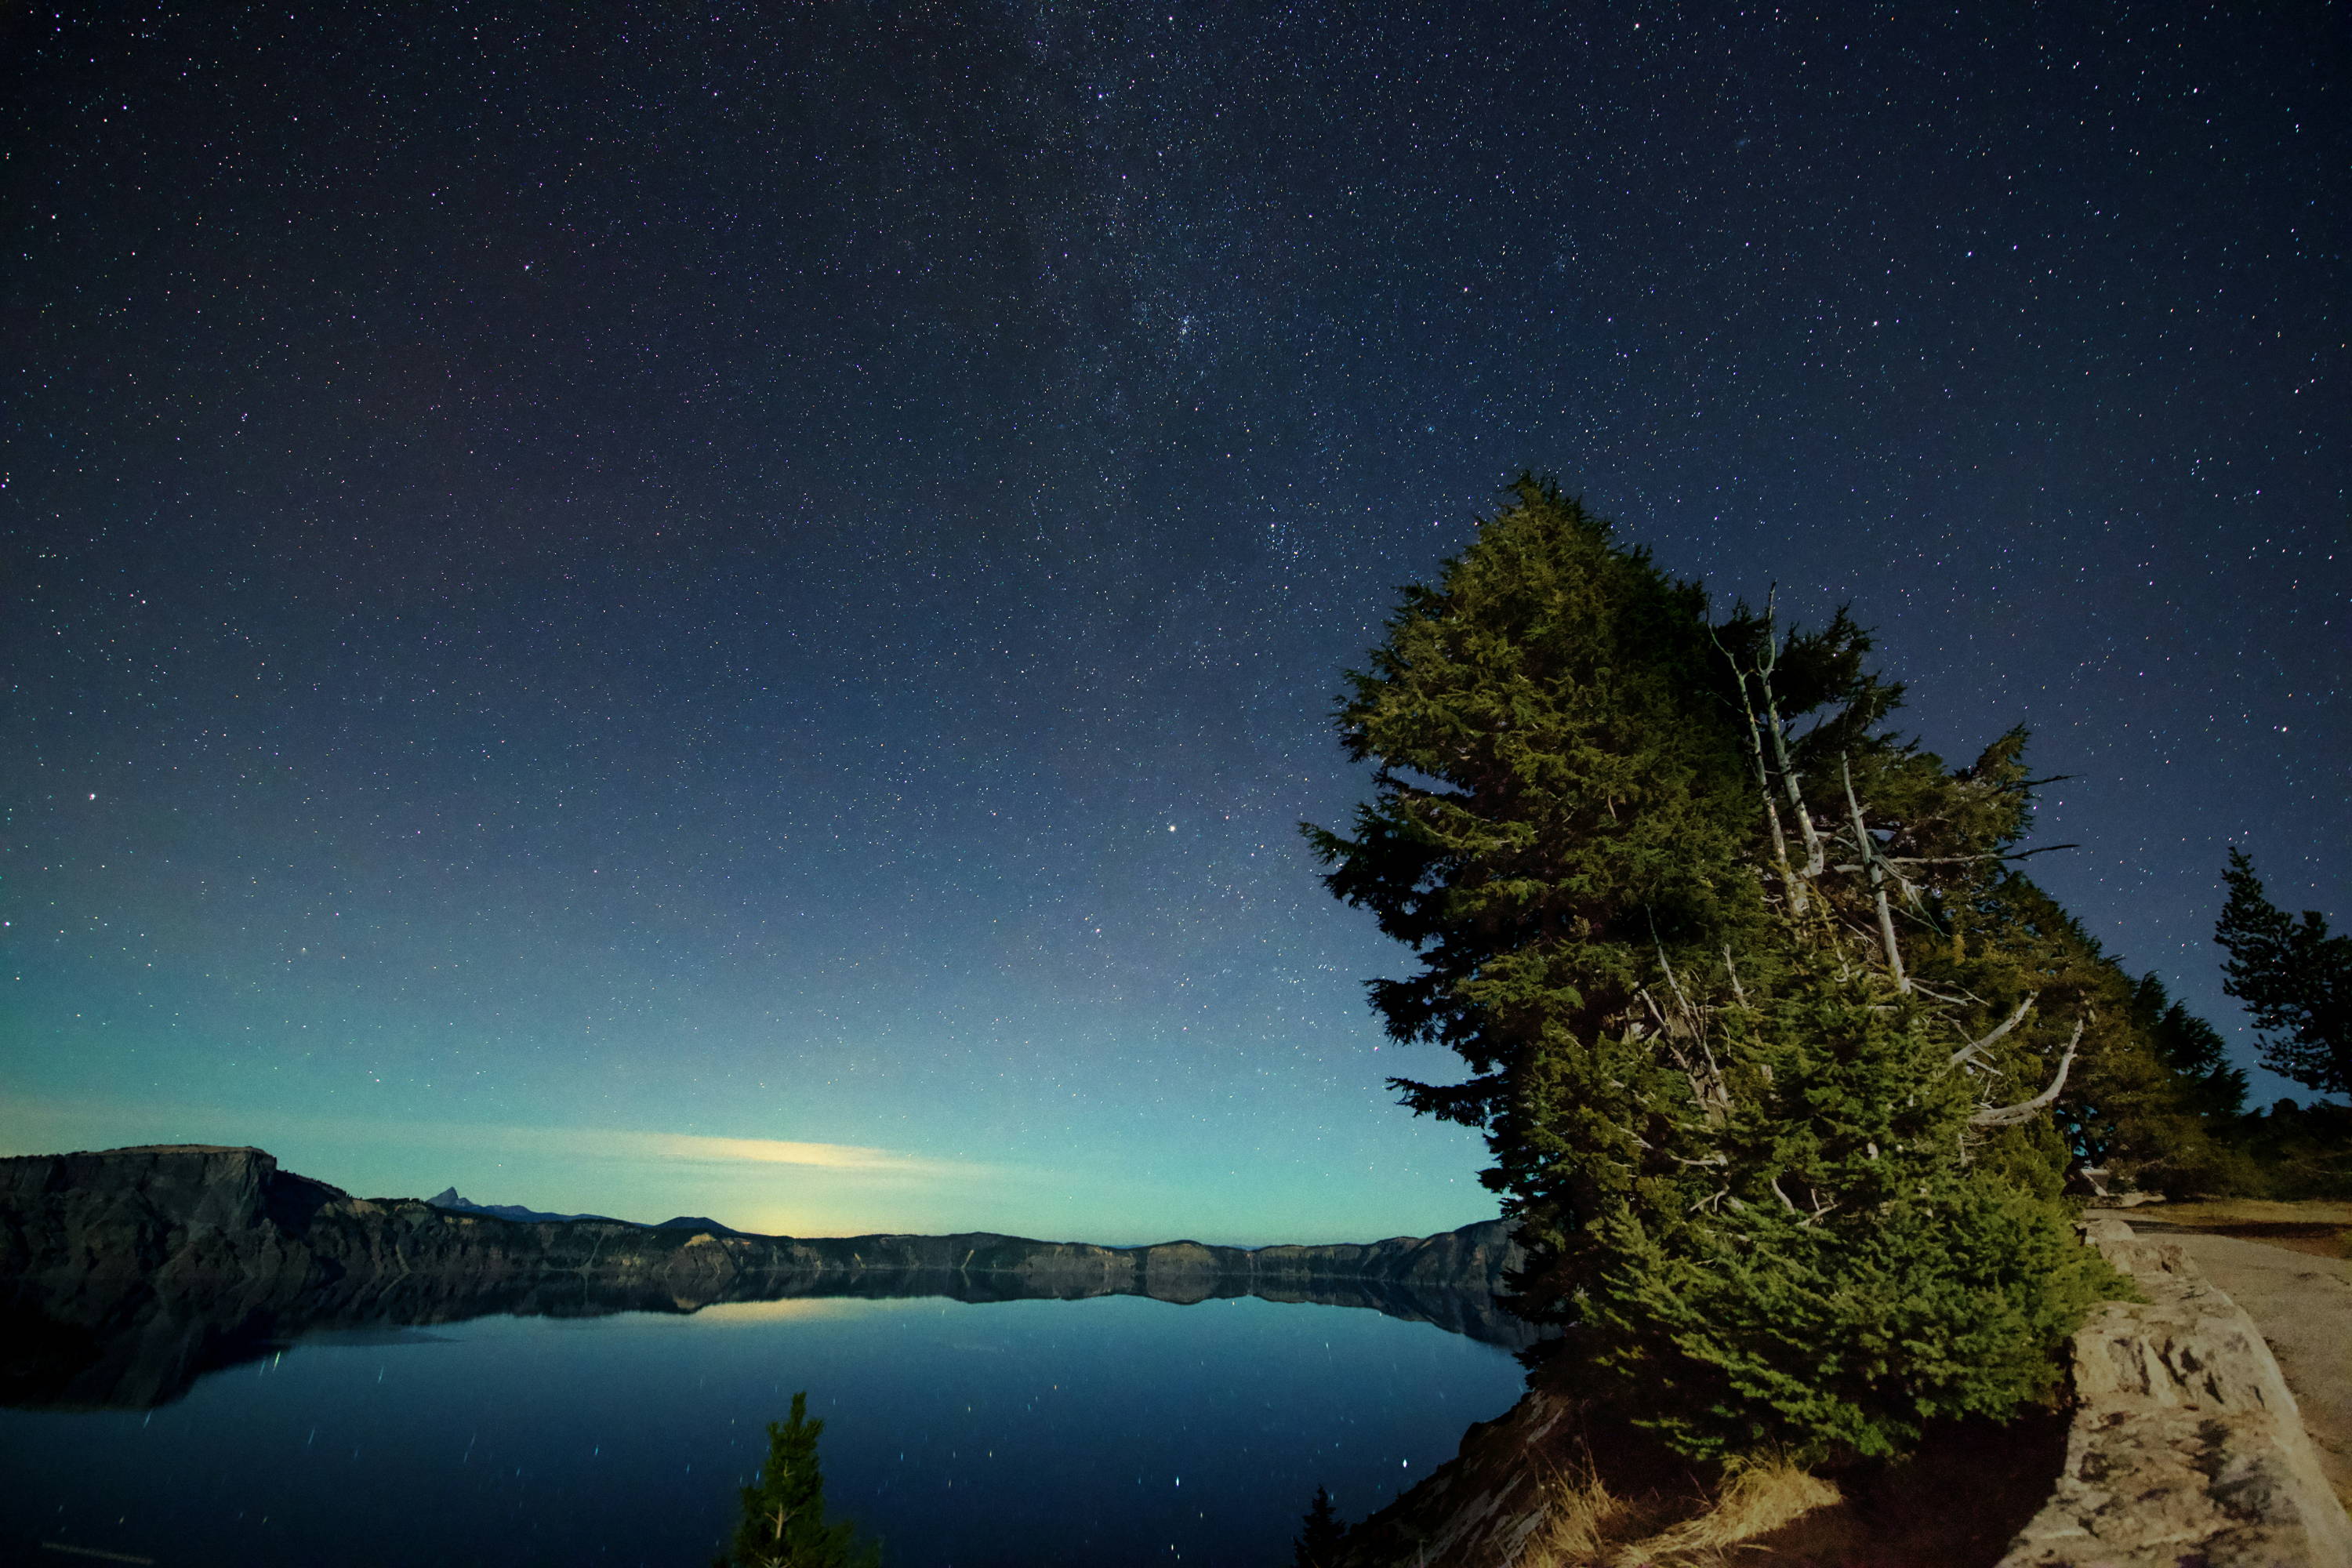 Crater Lake National Park night sky and stars over the lake.